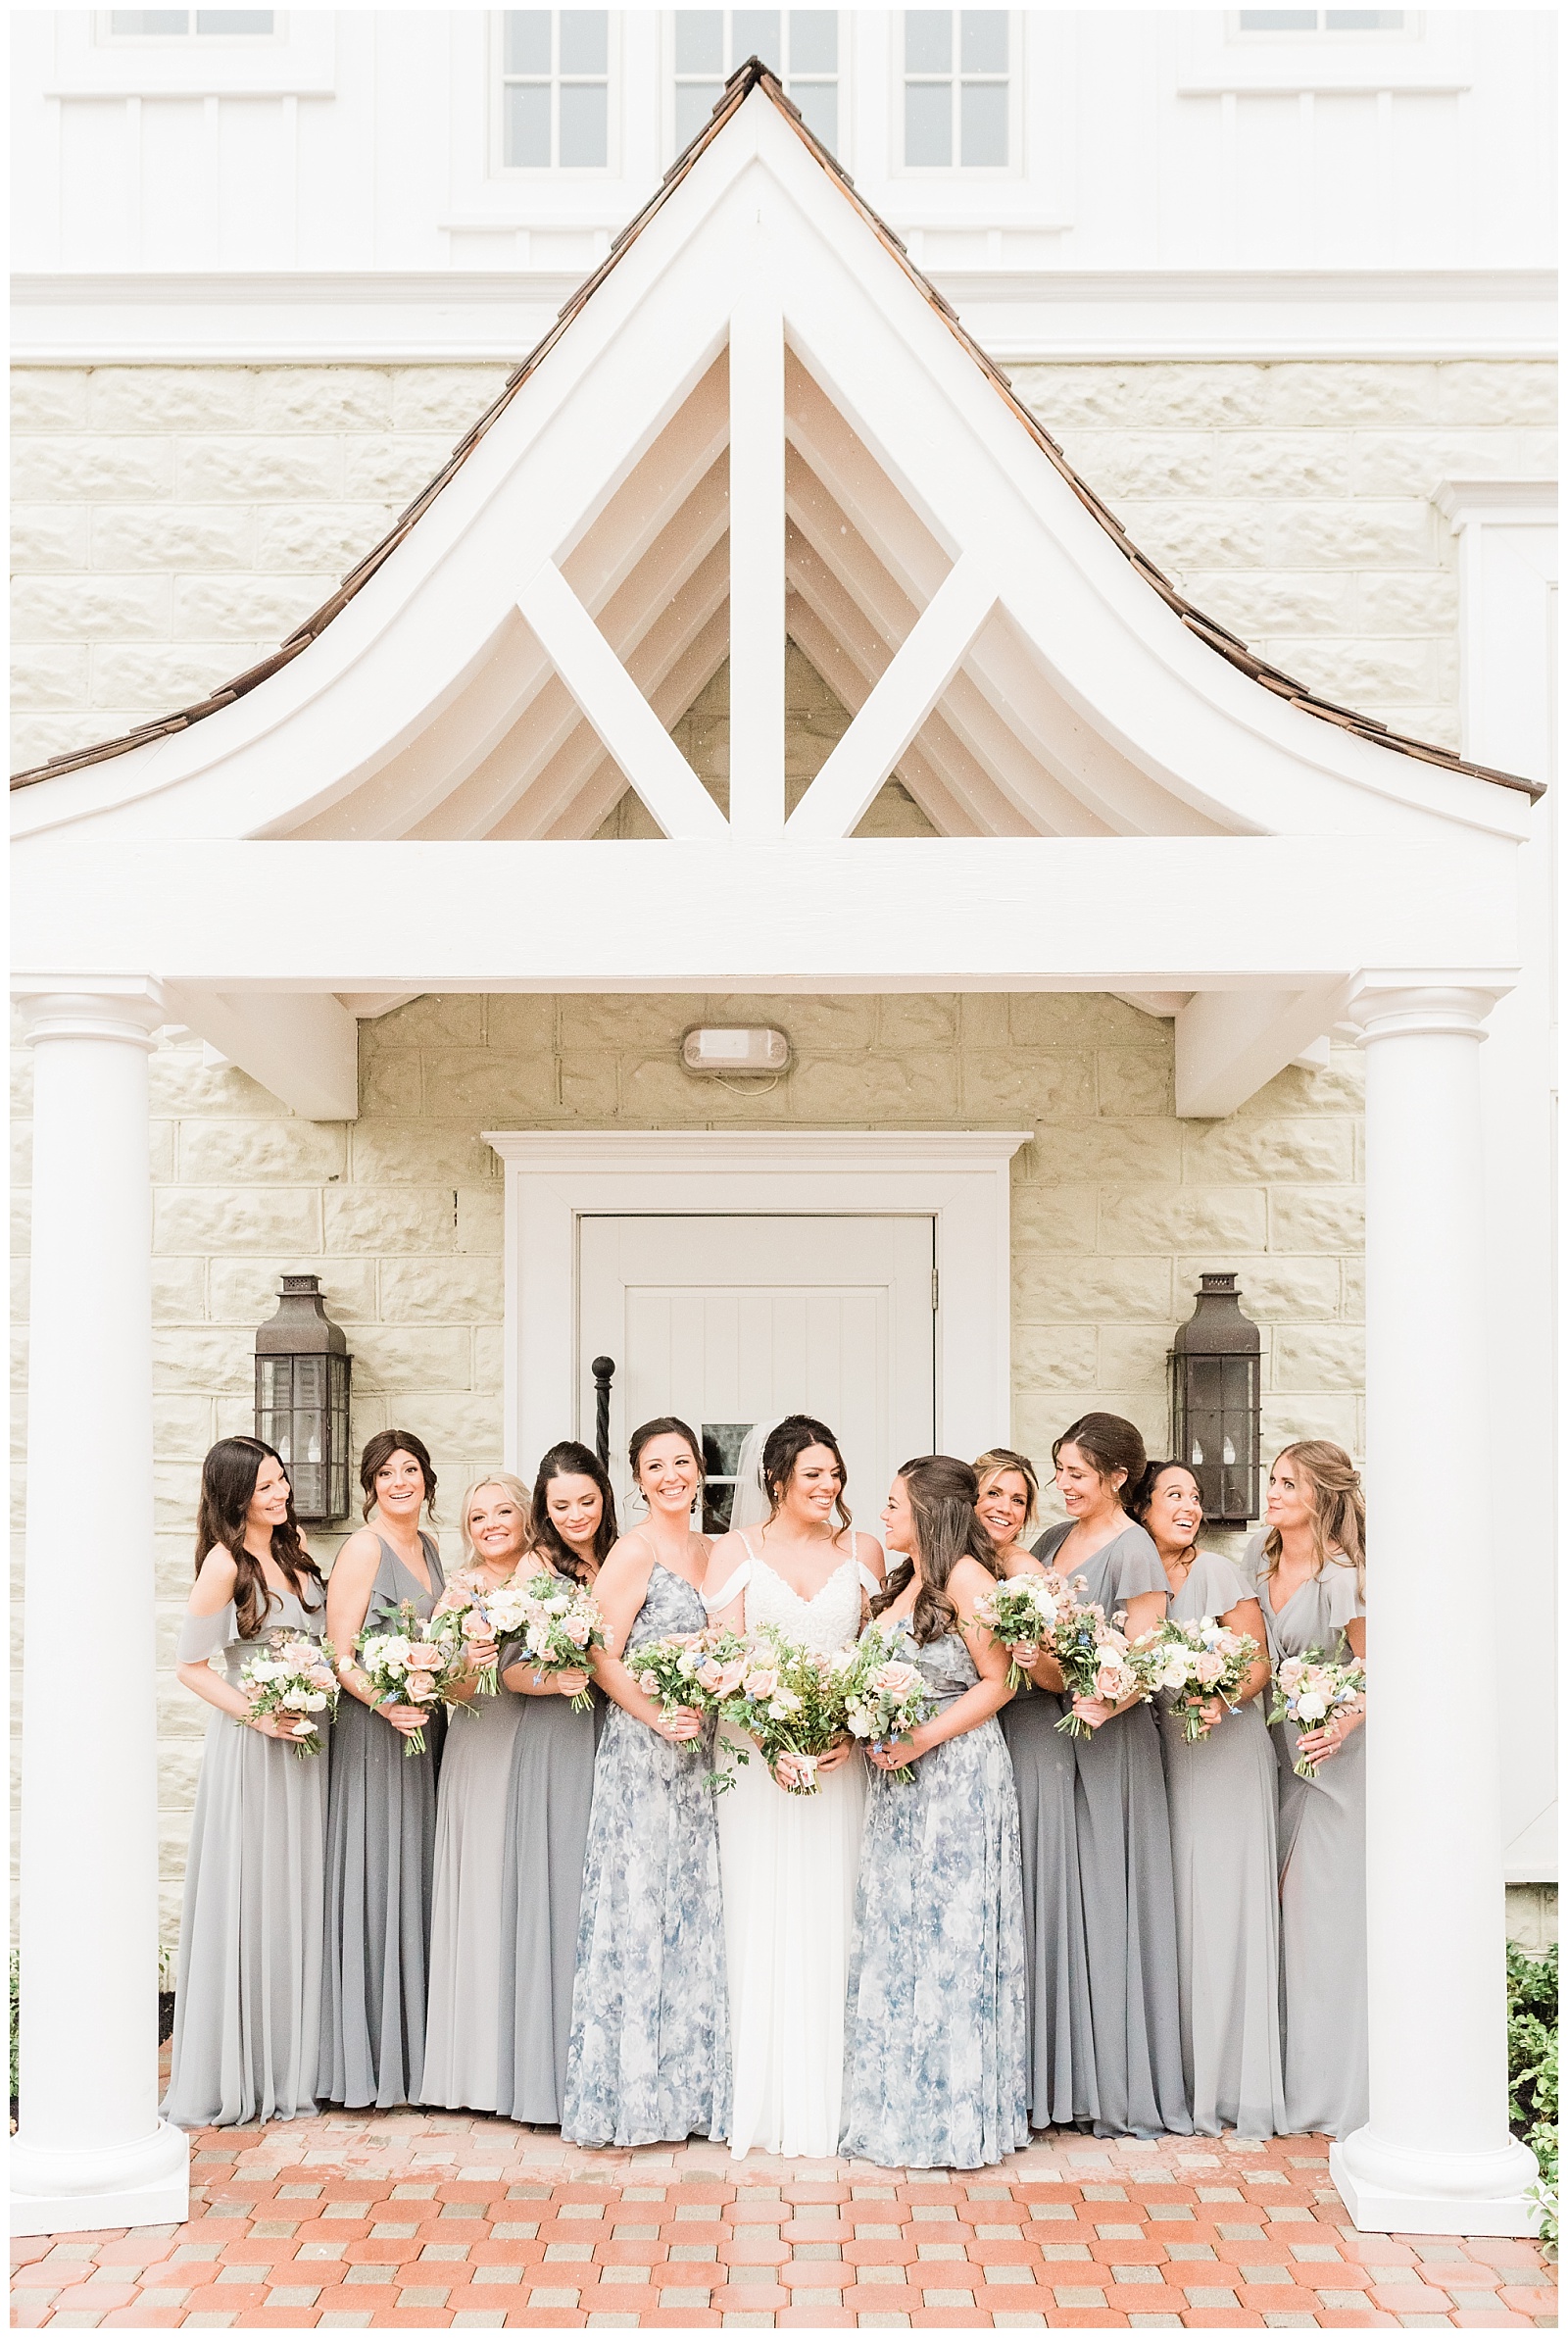 The bride laughs with her bridesmaids under an awning at the Coach House at the Ryland Inn.